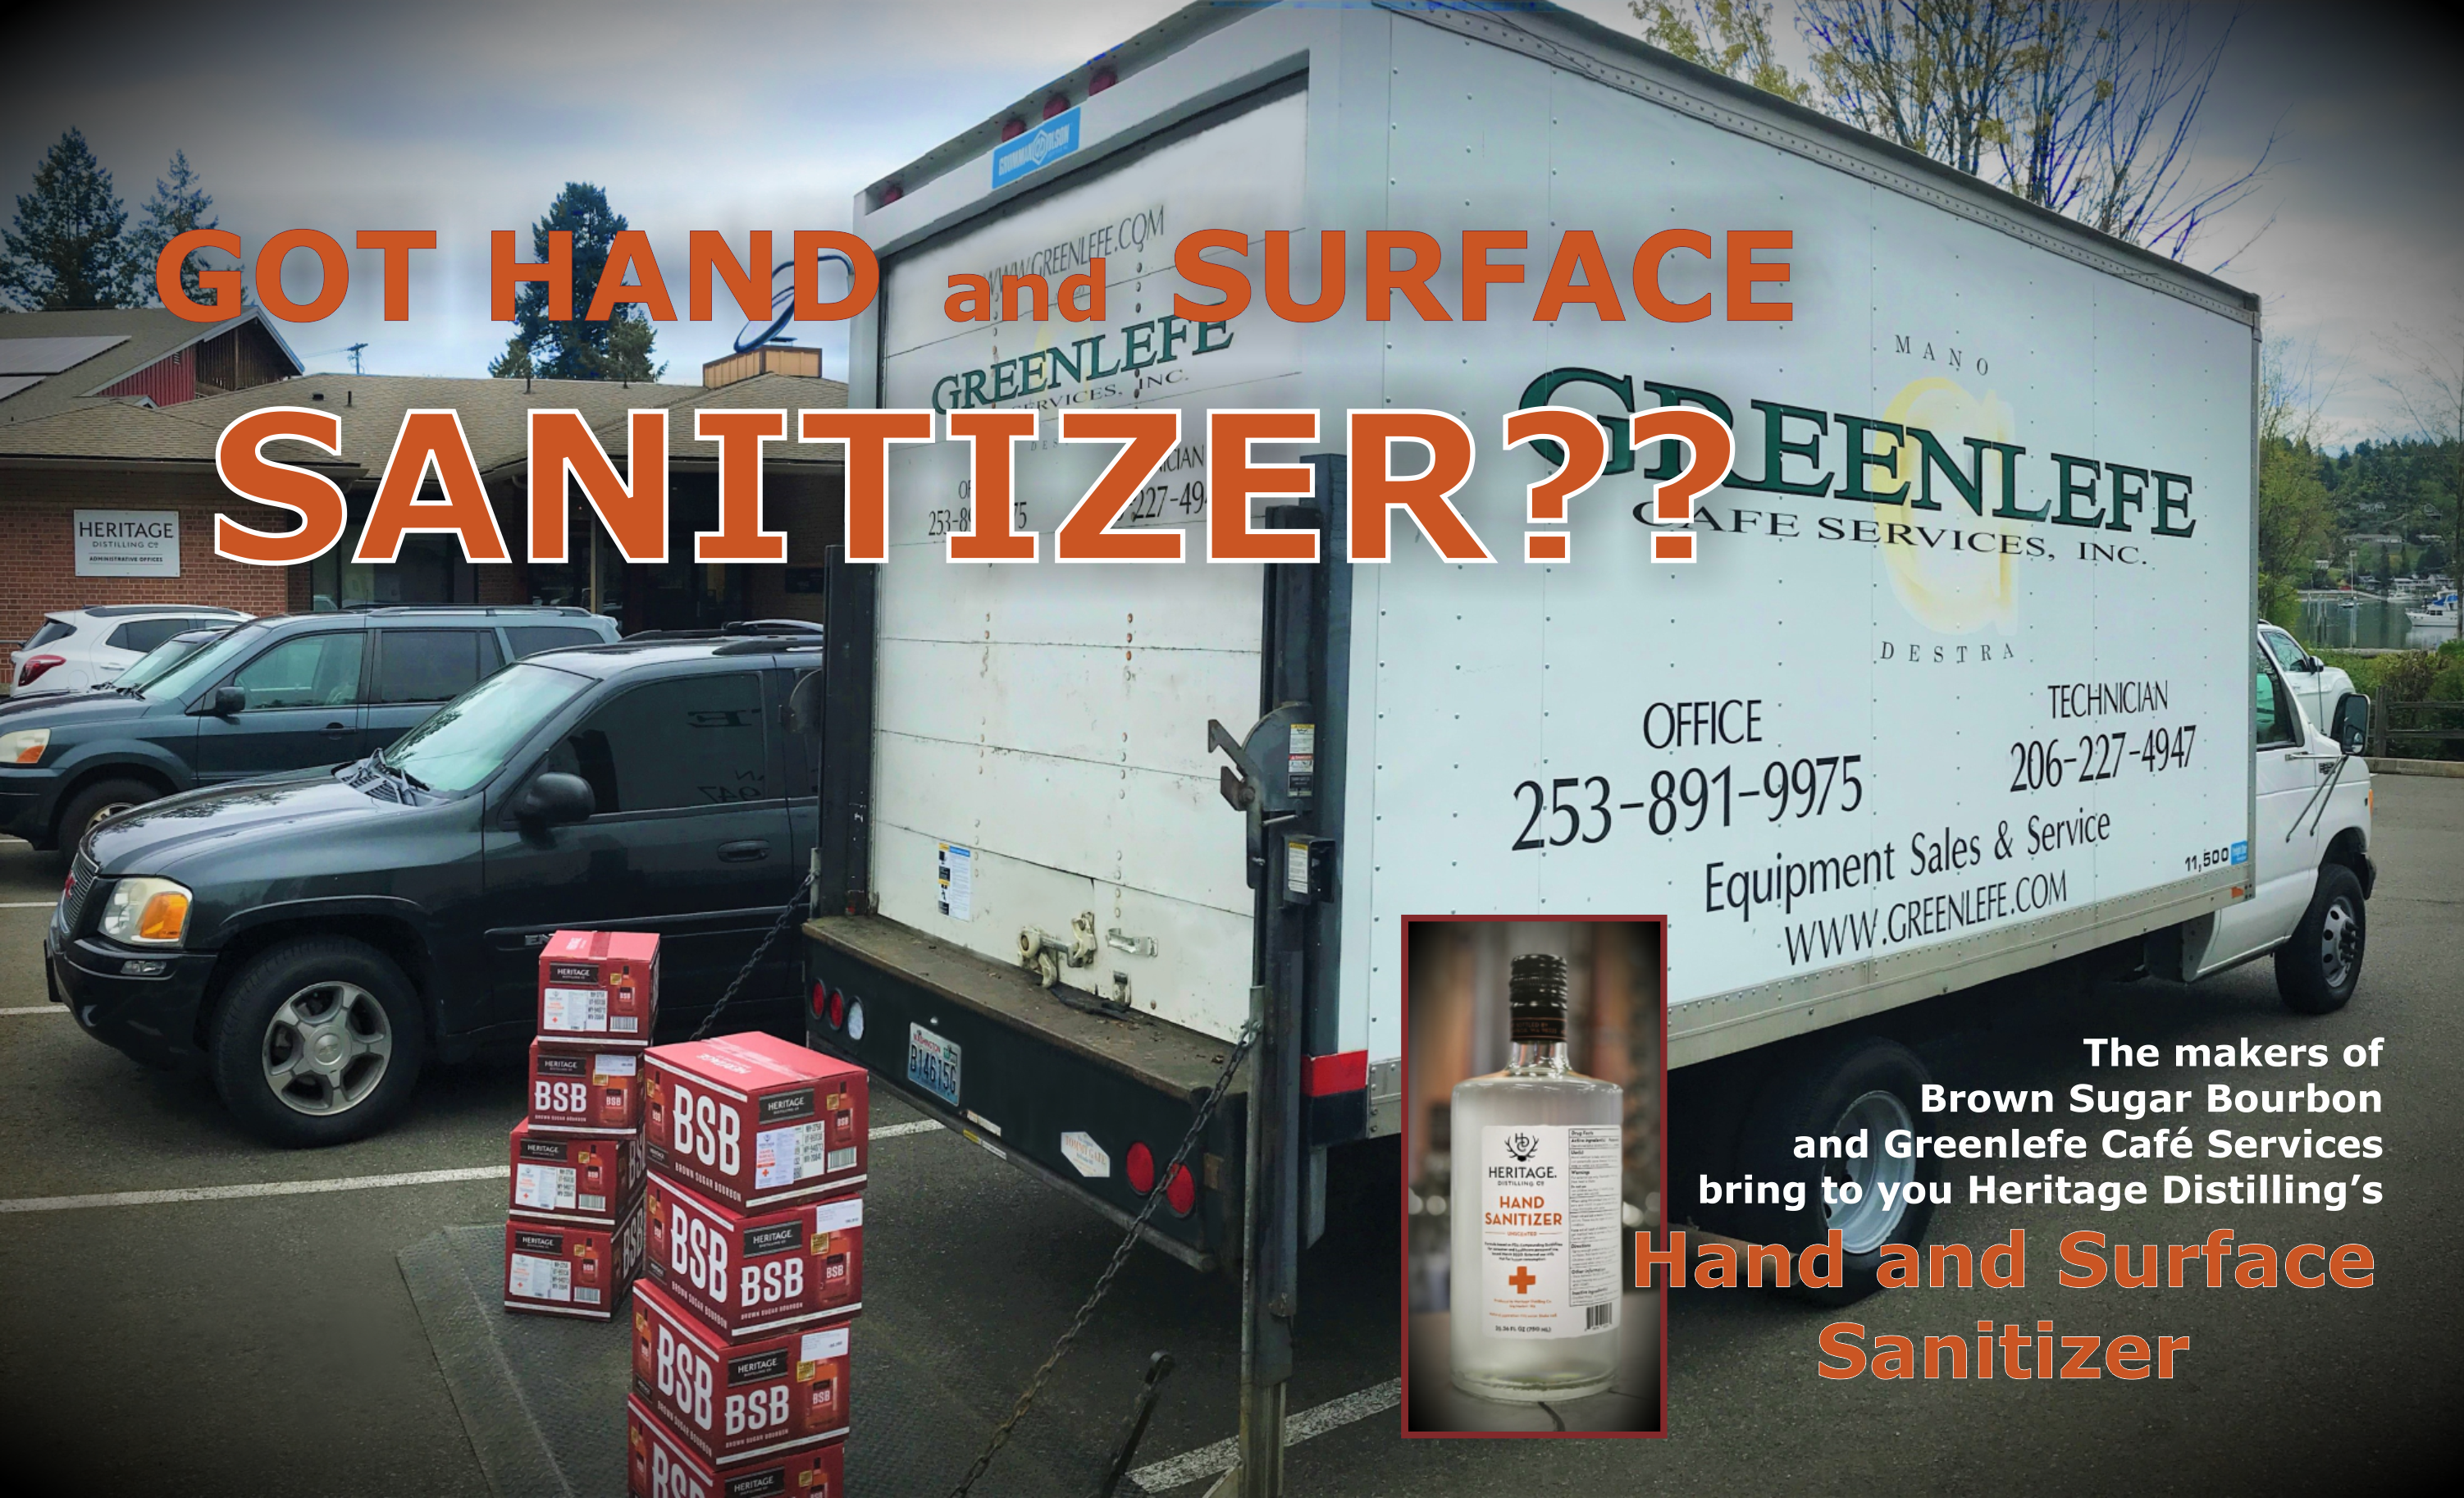 Hand and Surface Sanitizer from Heritage Distillery